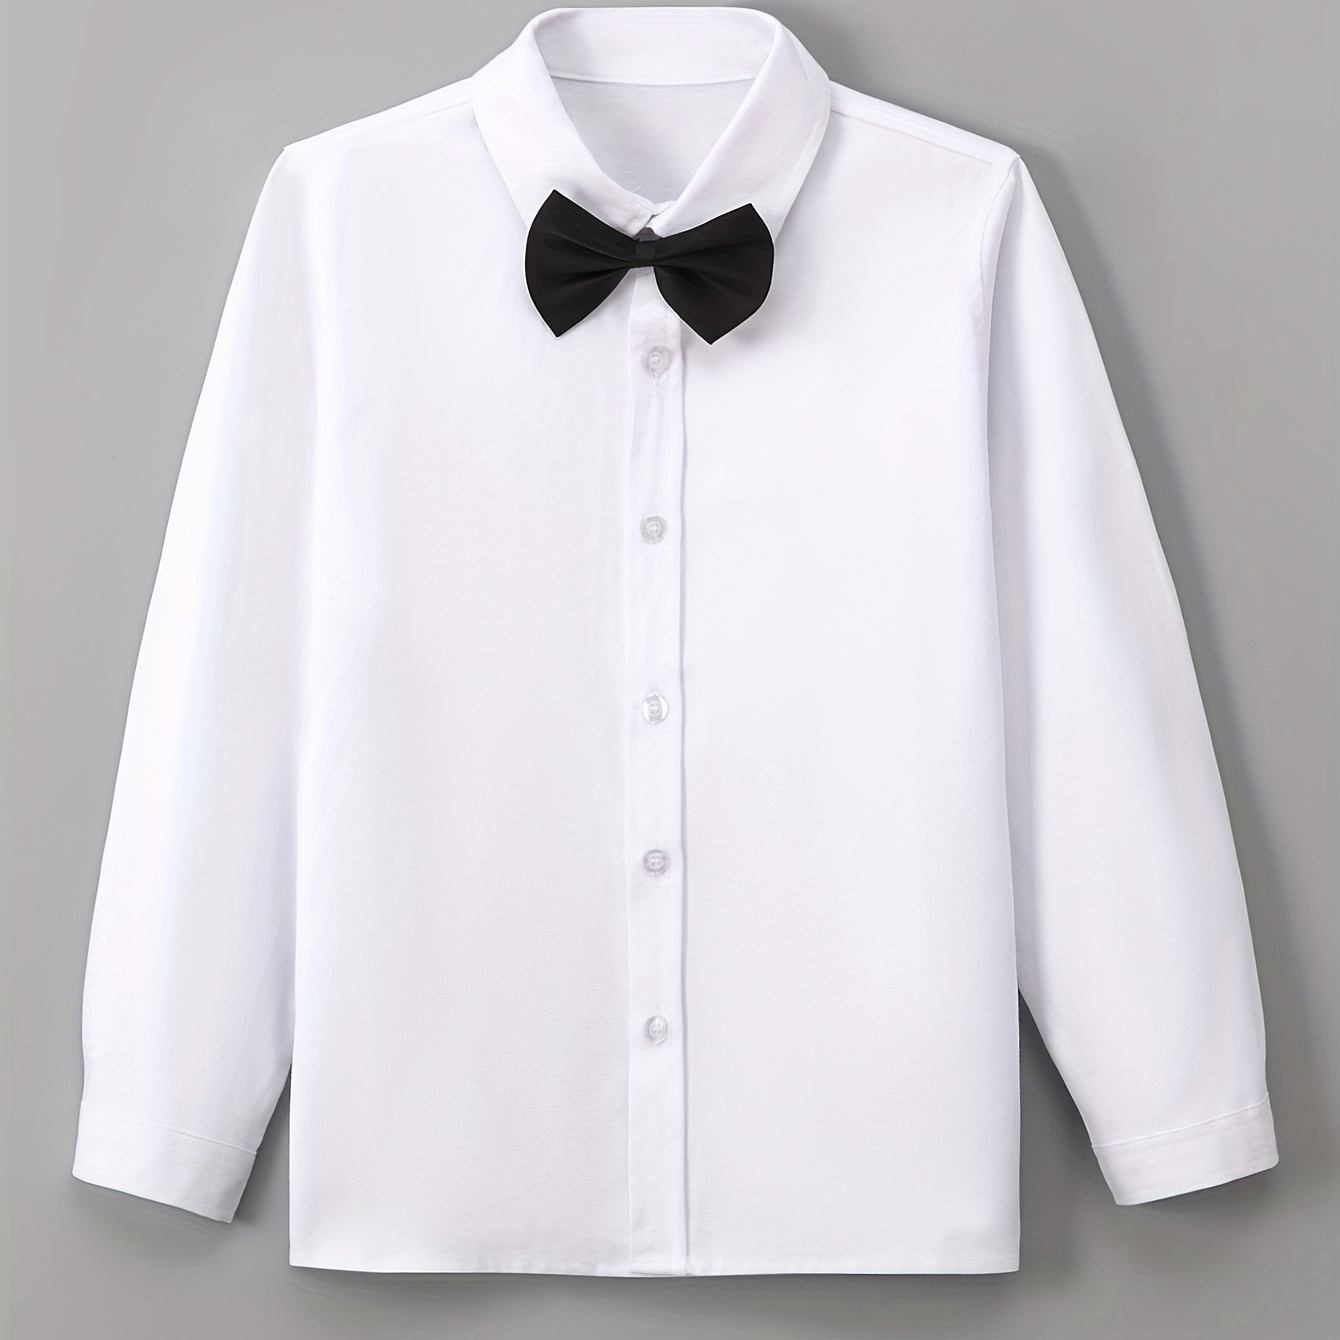 

Kids Boys Formal White Shirts With Bowtie, Long Sleeve Button Down Tops Spring Fall Outwear Shirts Jacket Clothes